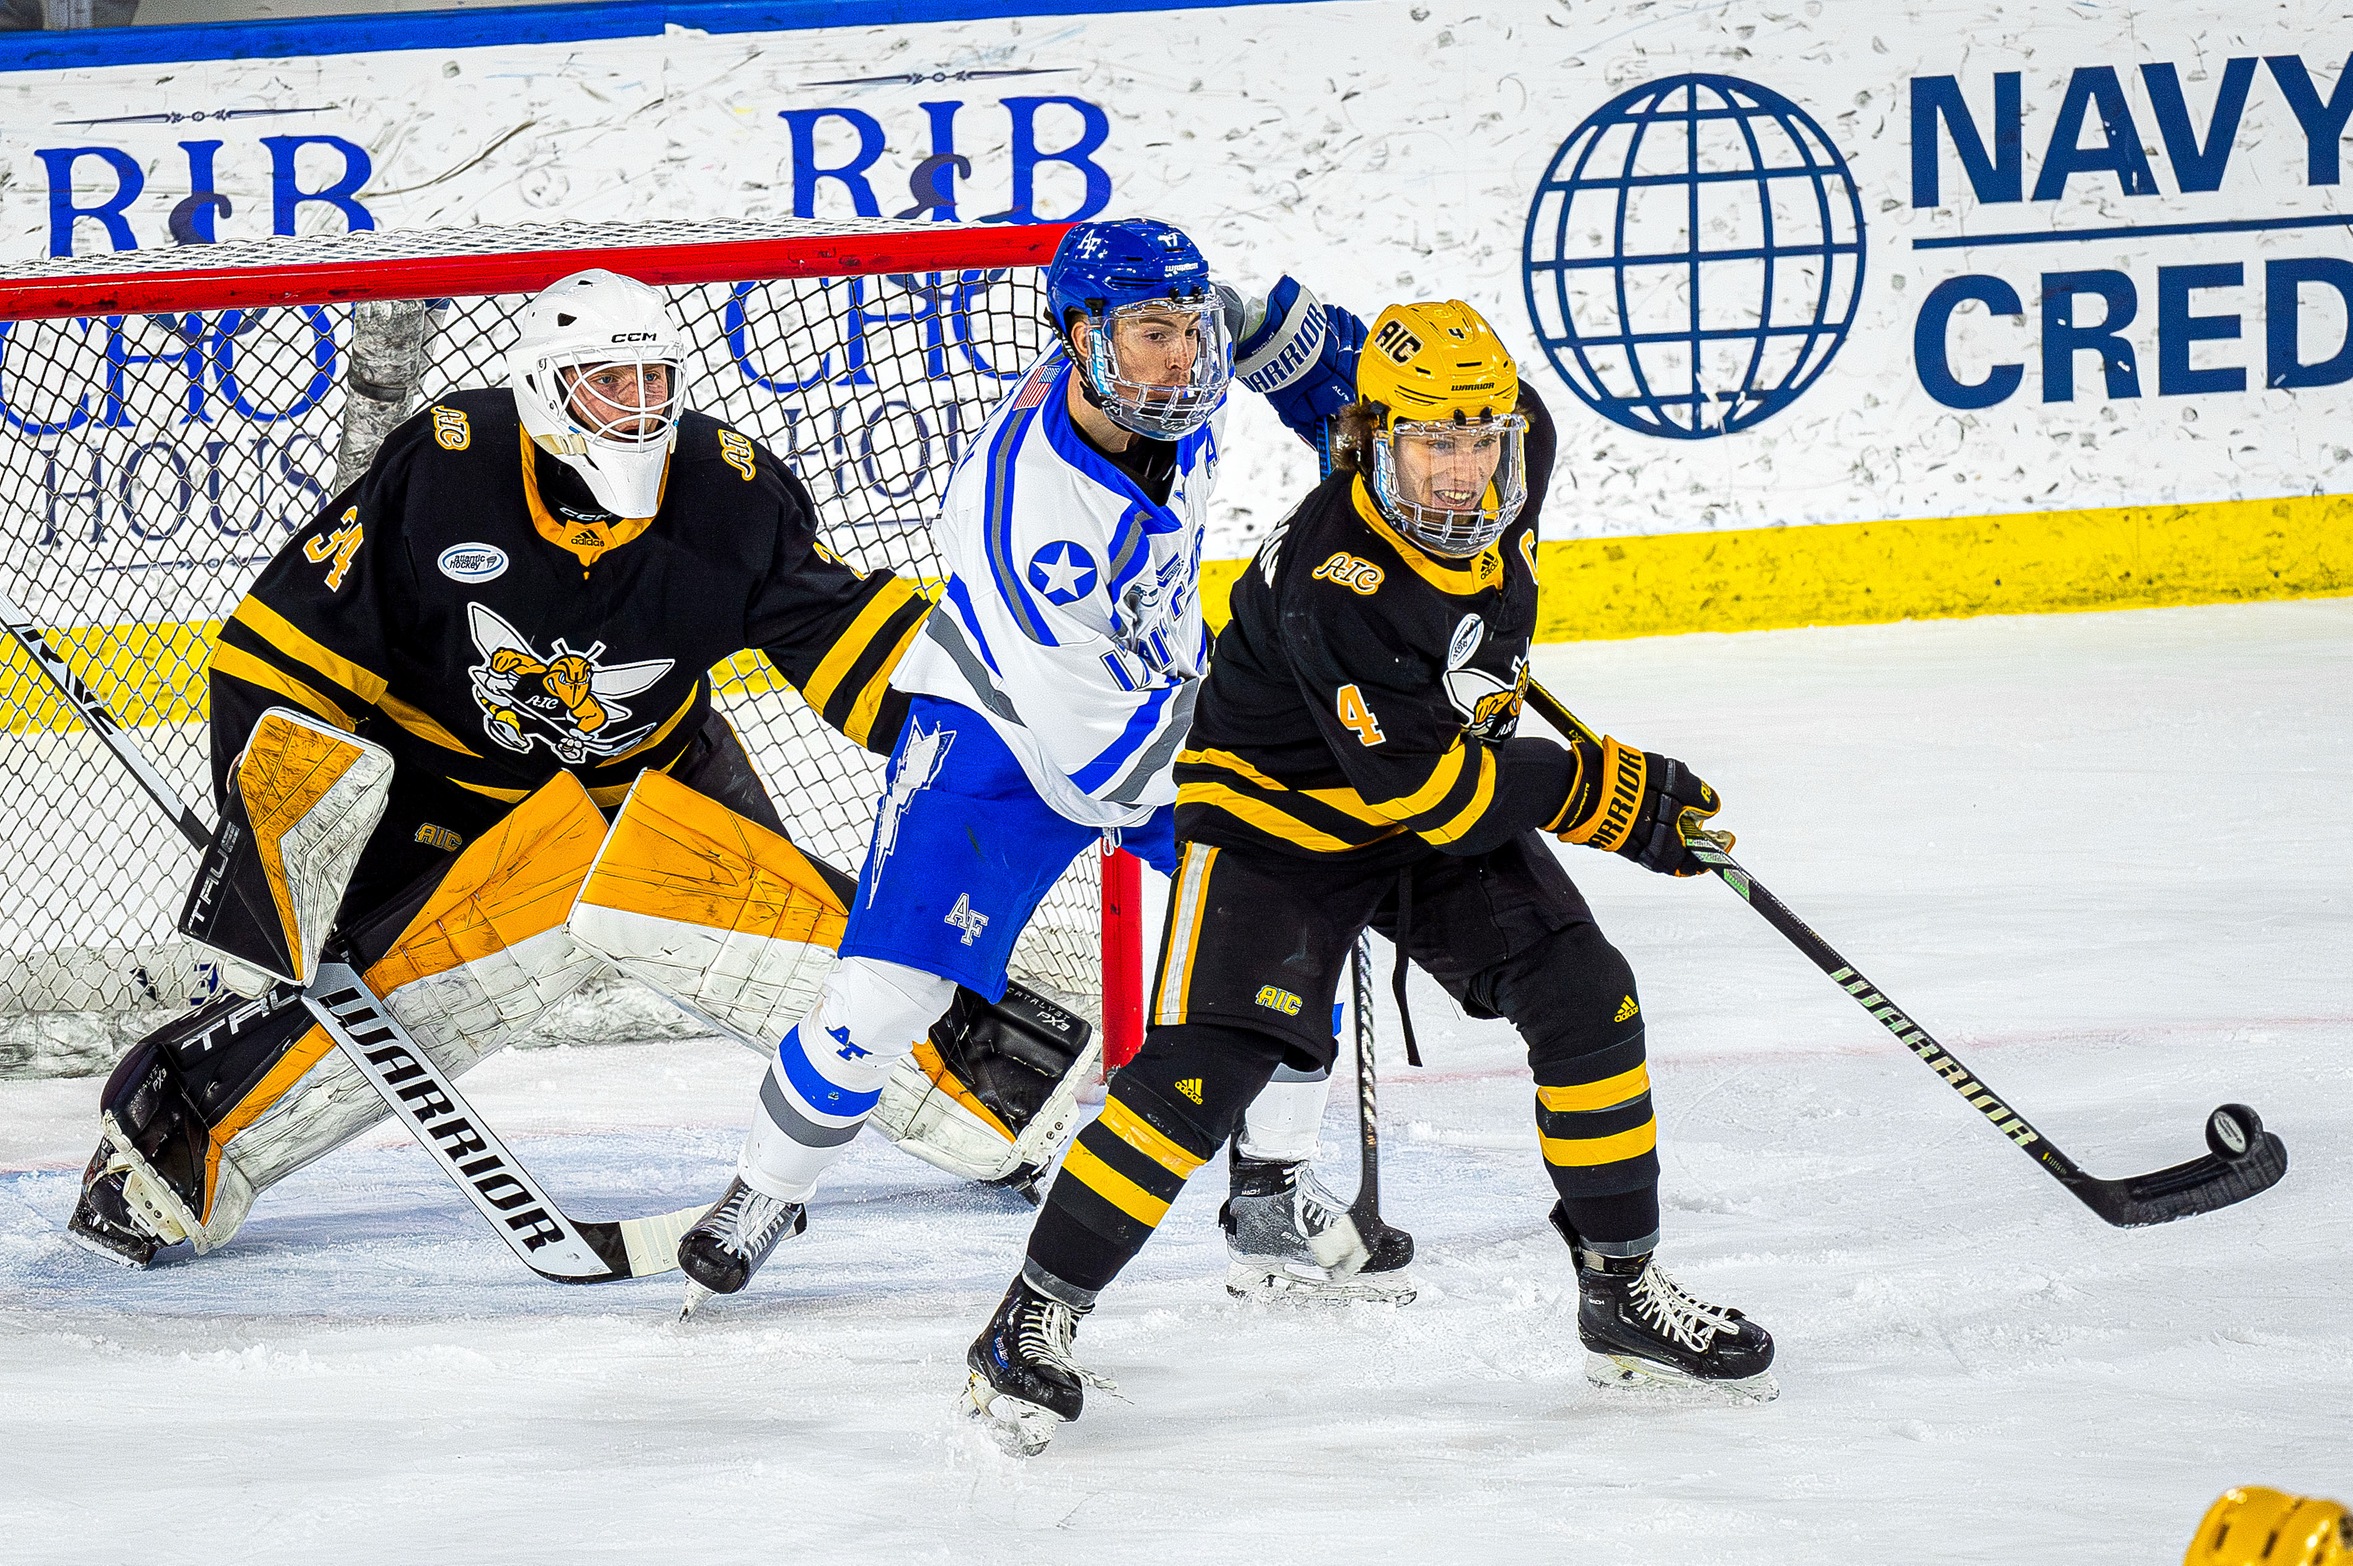 Moving On! Ice Hockey comes back, wins in OT to sweep Air Force